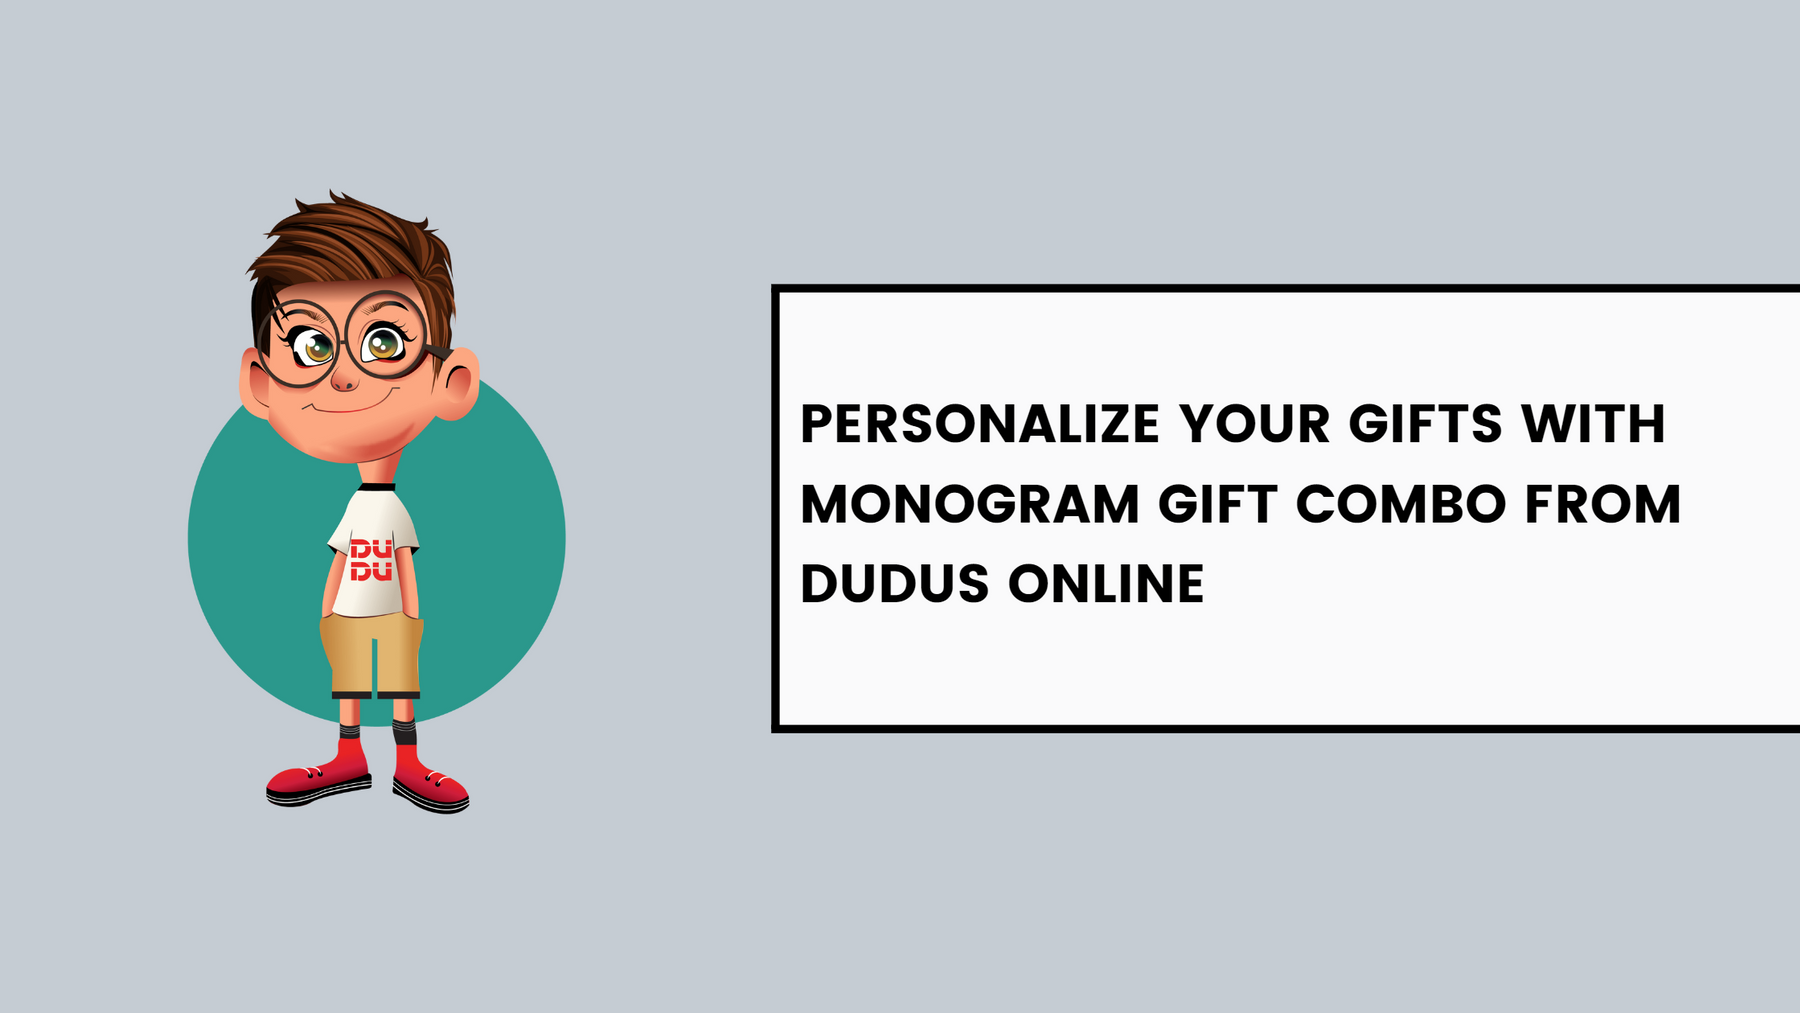 Personalize Your Gifts With Monogram Gift Combo From Dudus Online